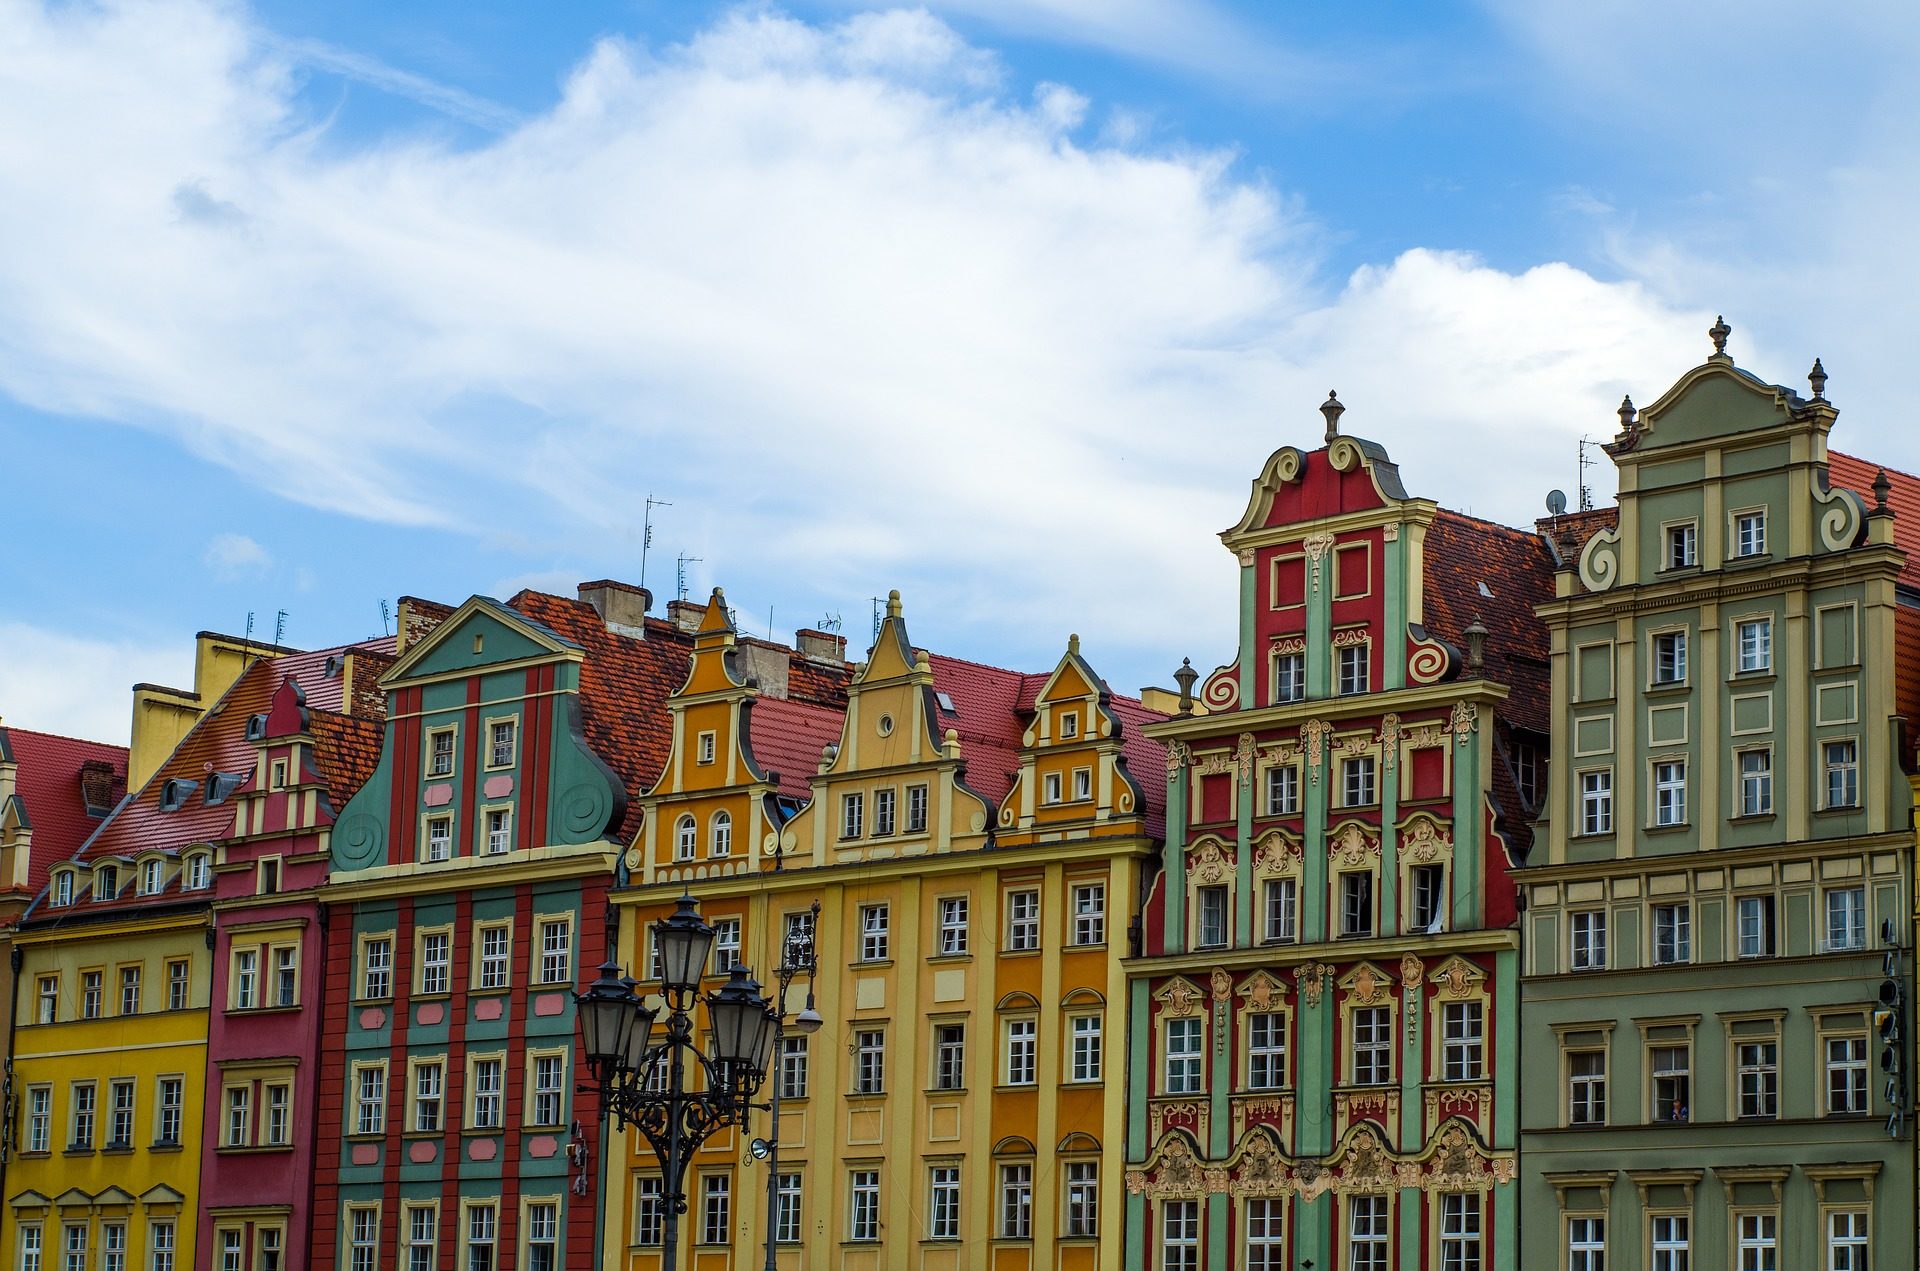 Poland and the city of Wroclaw, emerging startup destination